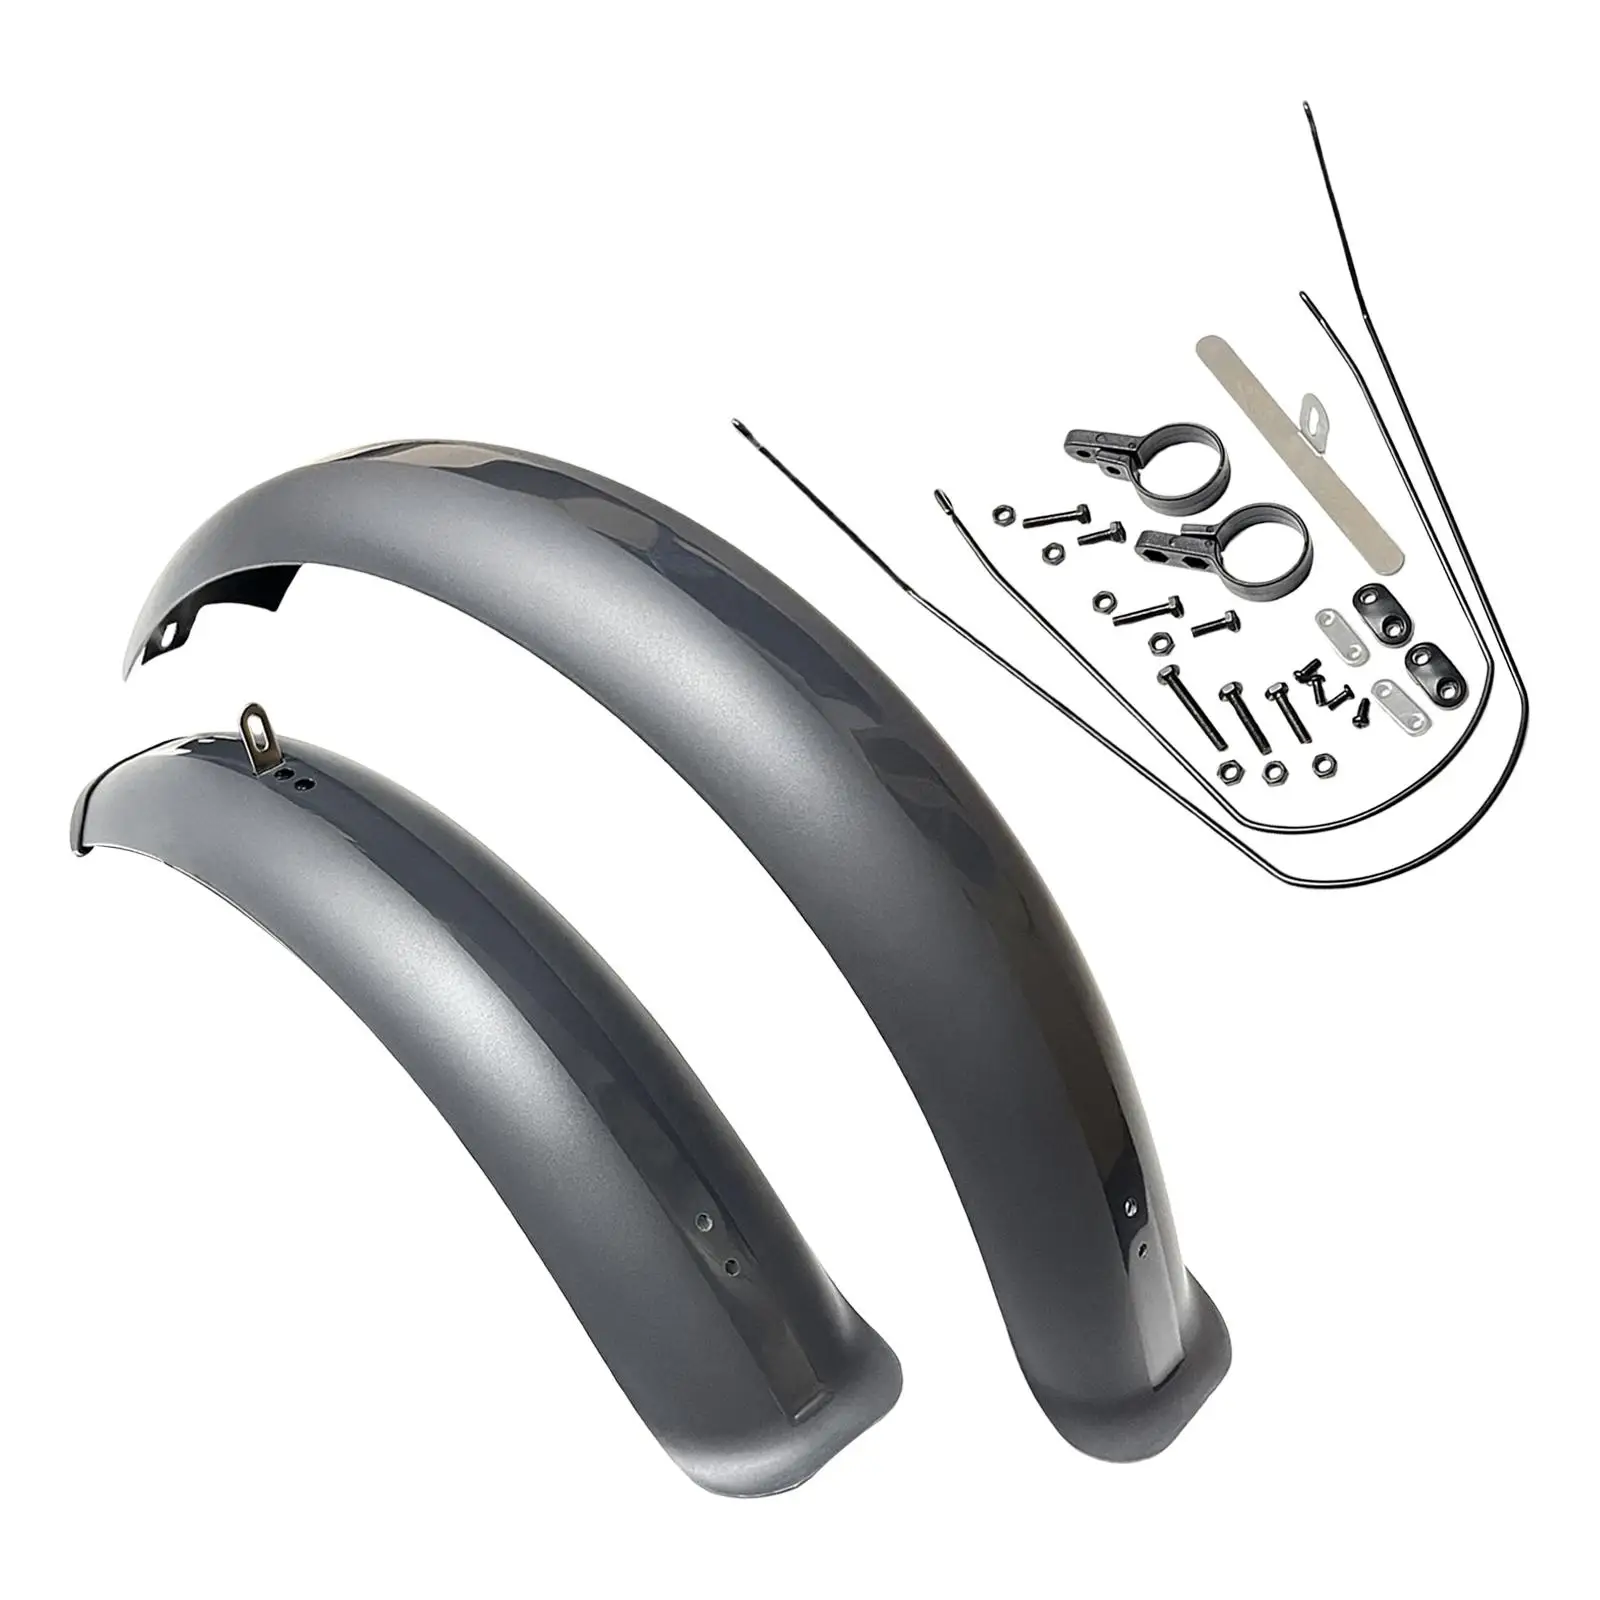 Bike Mudguard Front Rear Set Spare Parts Accessories Simple Installation